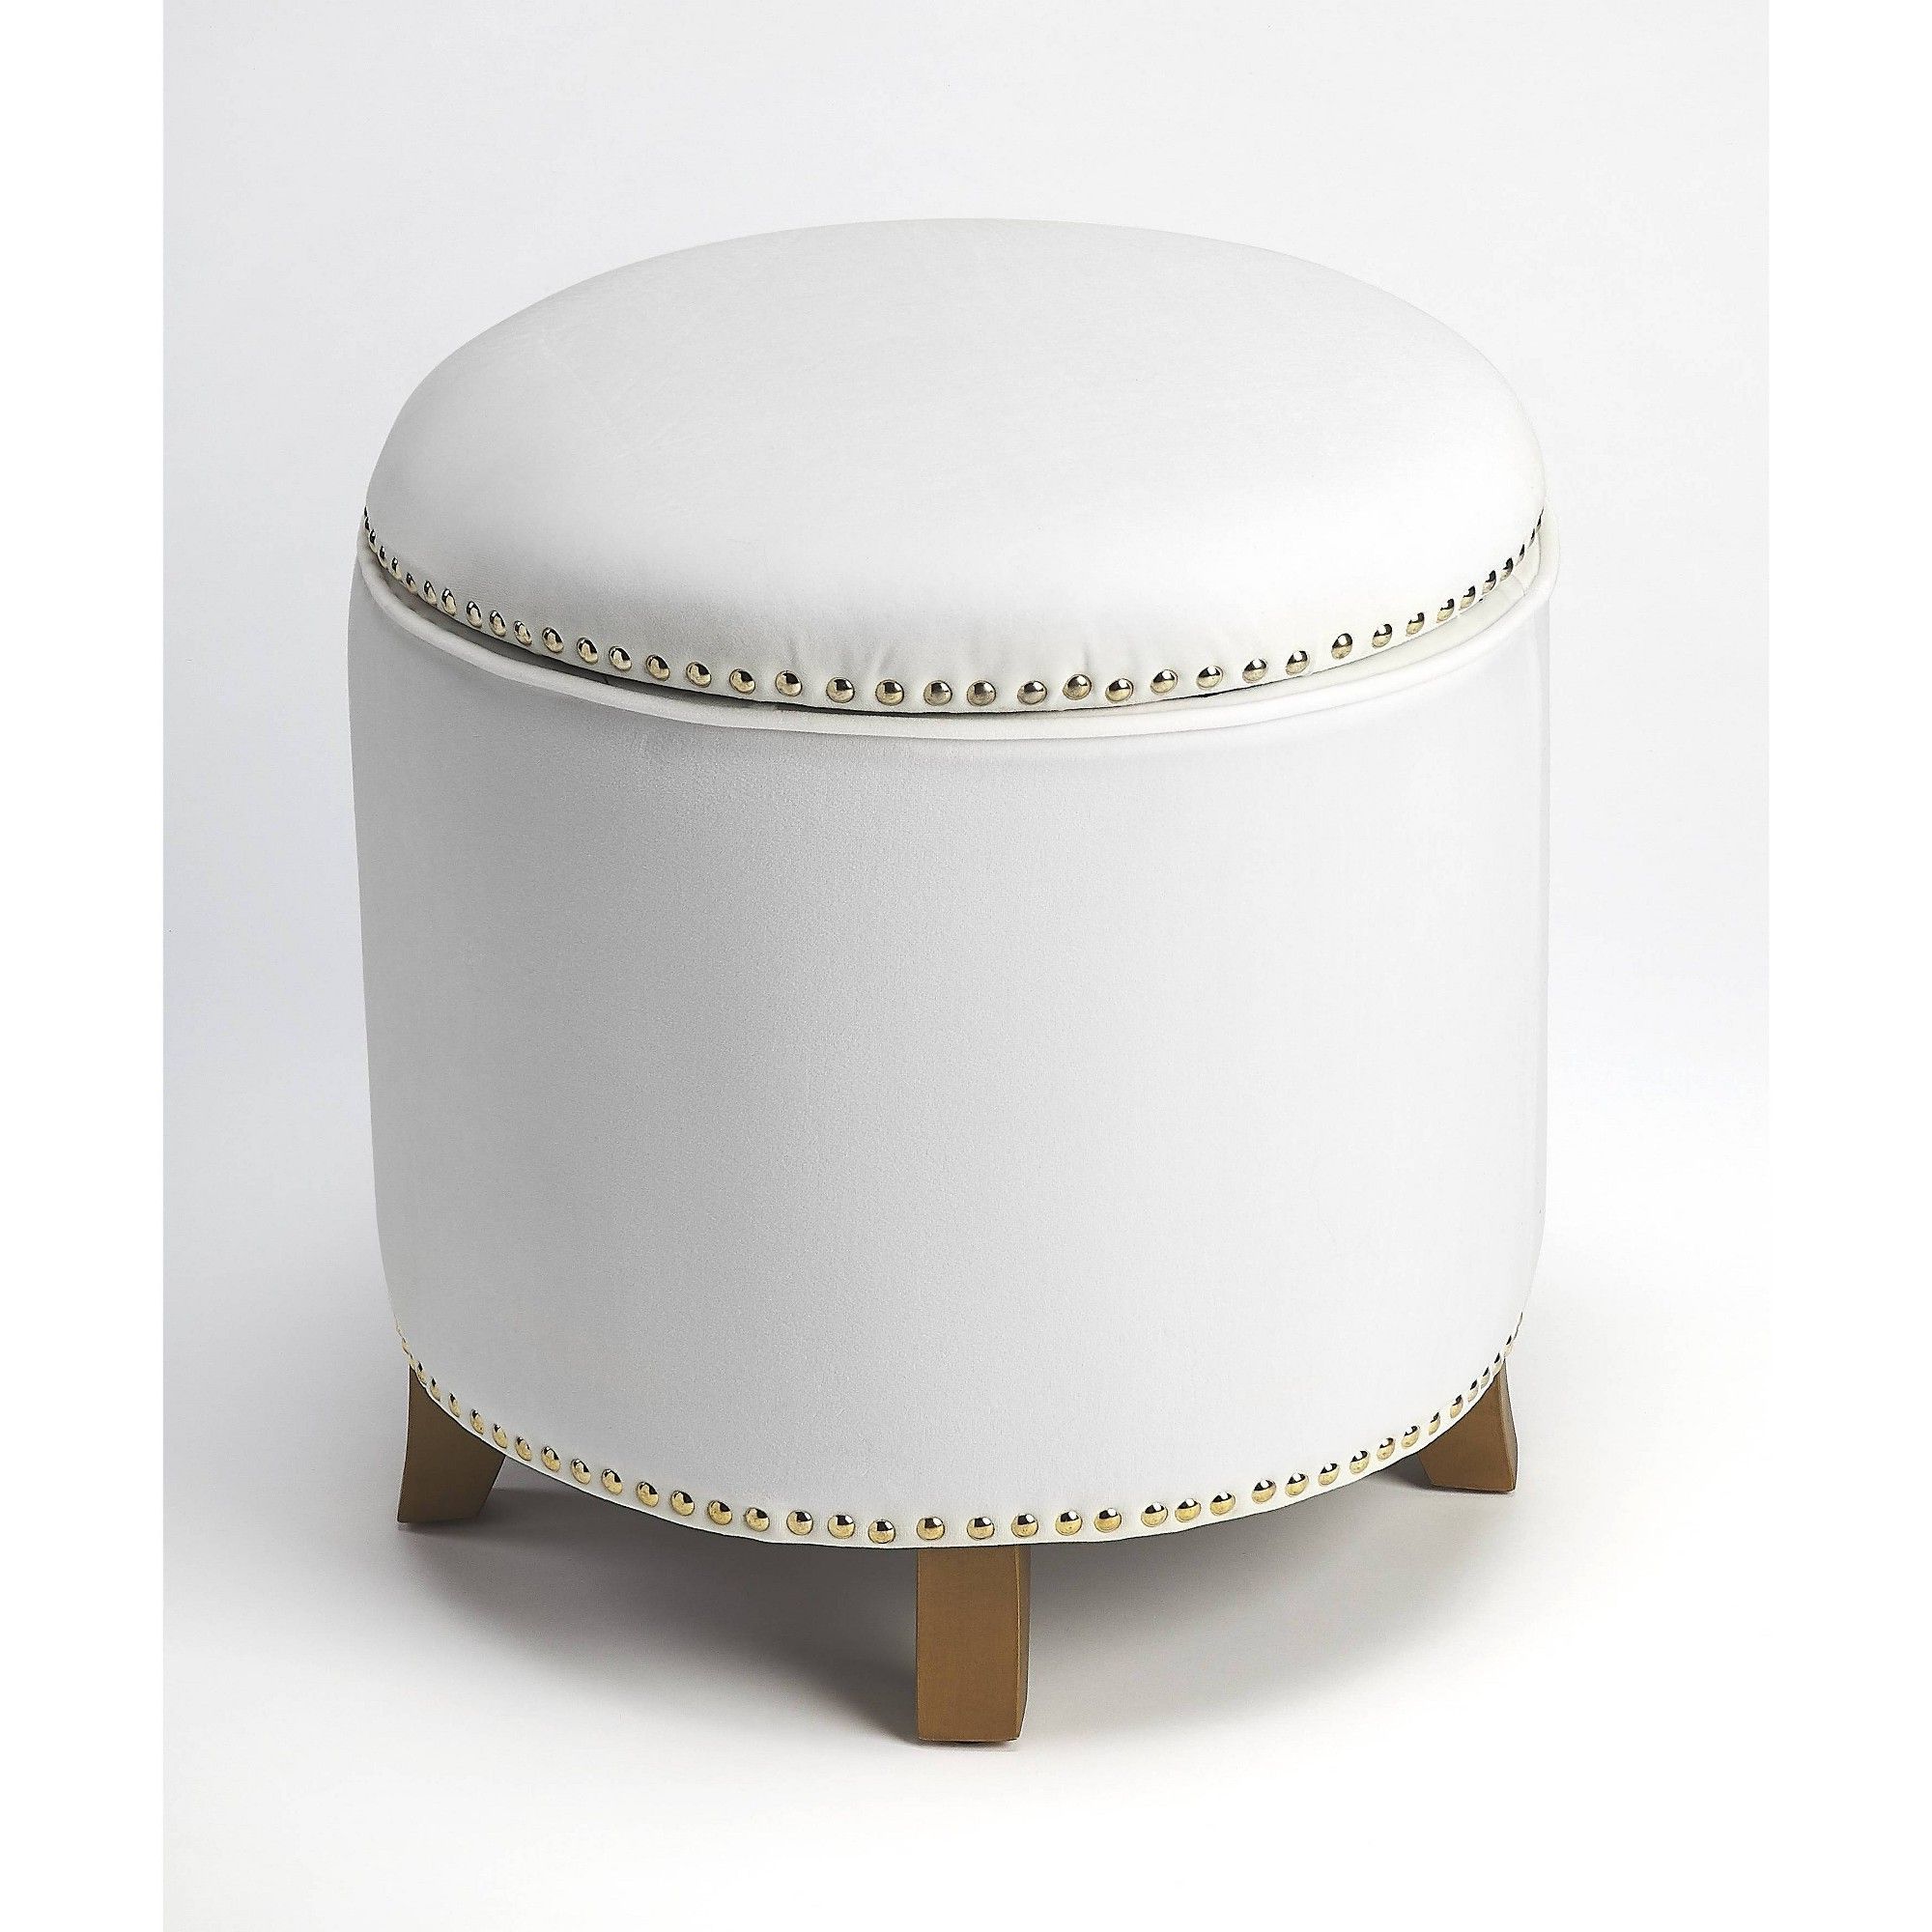 Yara Velvet Storage Ottoman White – Butler Specialty, Adult Unisex Pertaining To Widely Used White Large Round Ottomans (View 6 of 10)